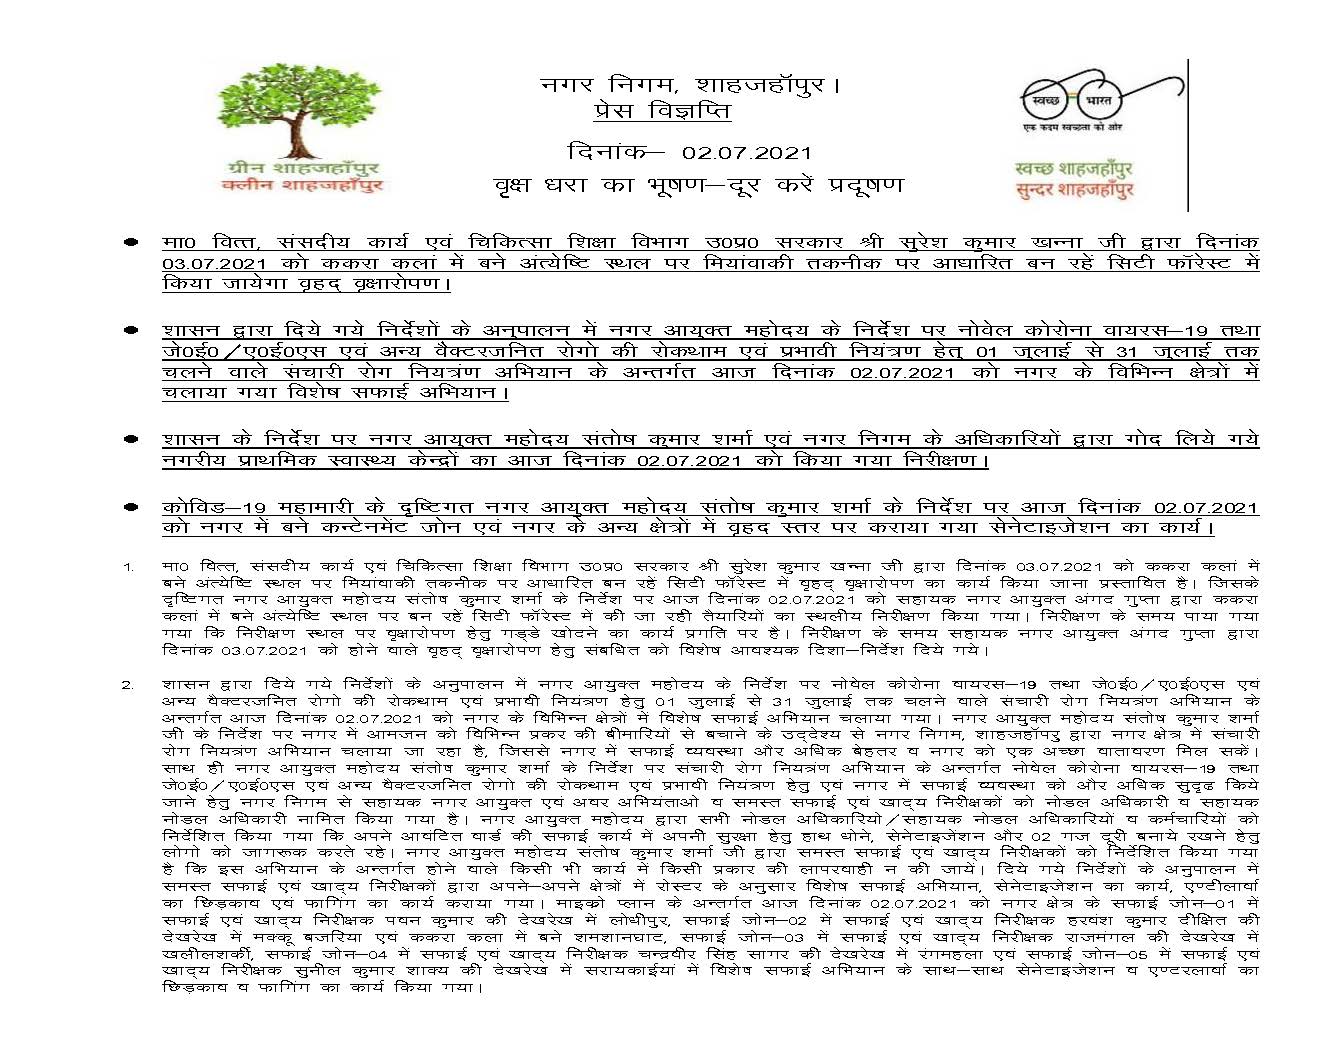 Huge plantation will be done in City Forest by Hon'ble Minister, Shri Suresh Kumar Khanna ji on 03-07-2021.